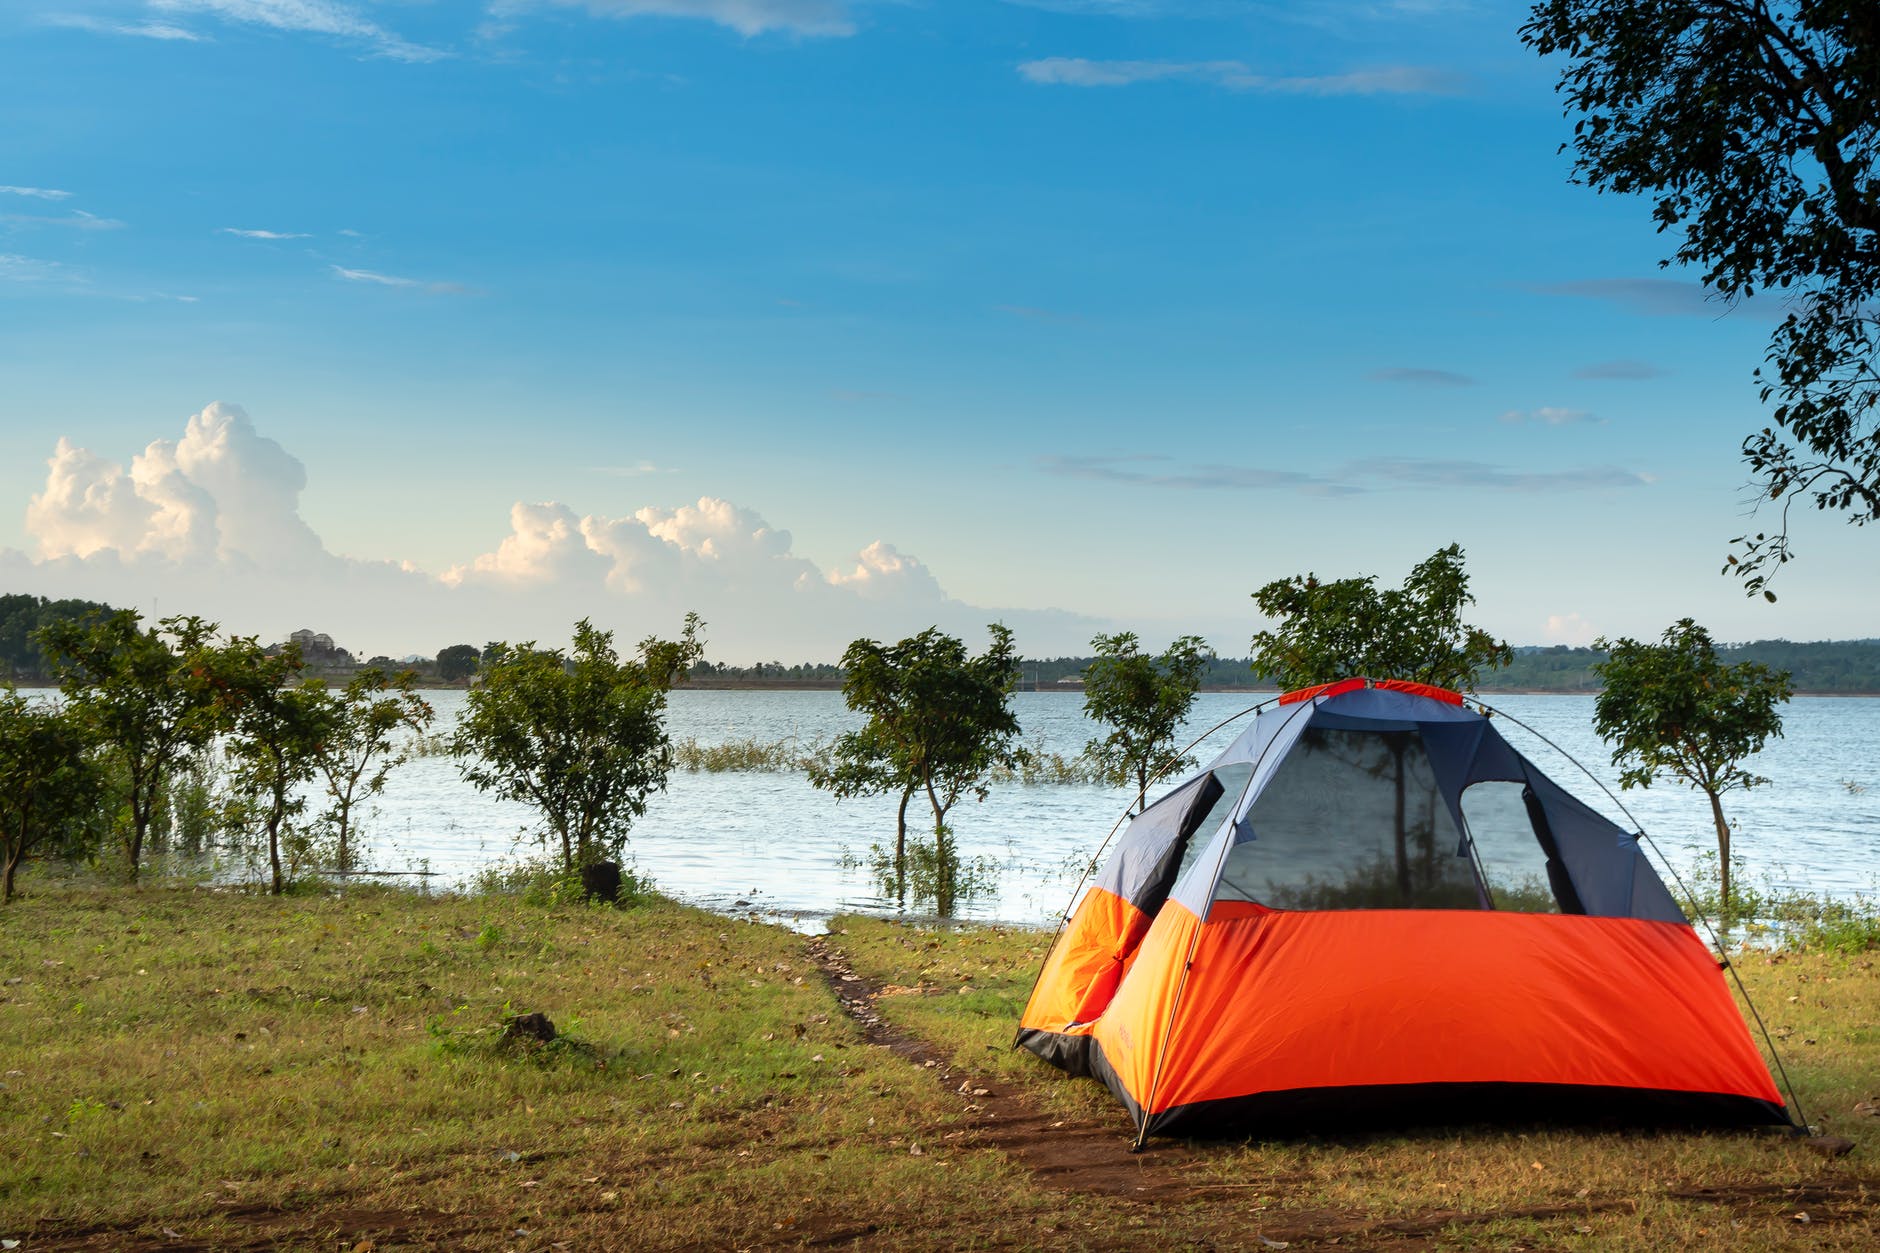 Don’t forget to carry these 10 things before you go camping